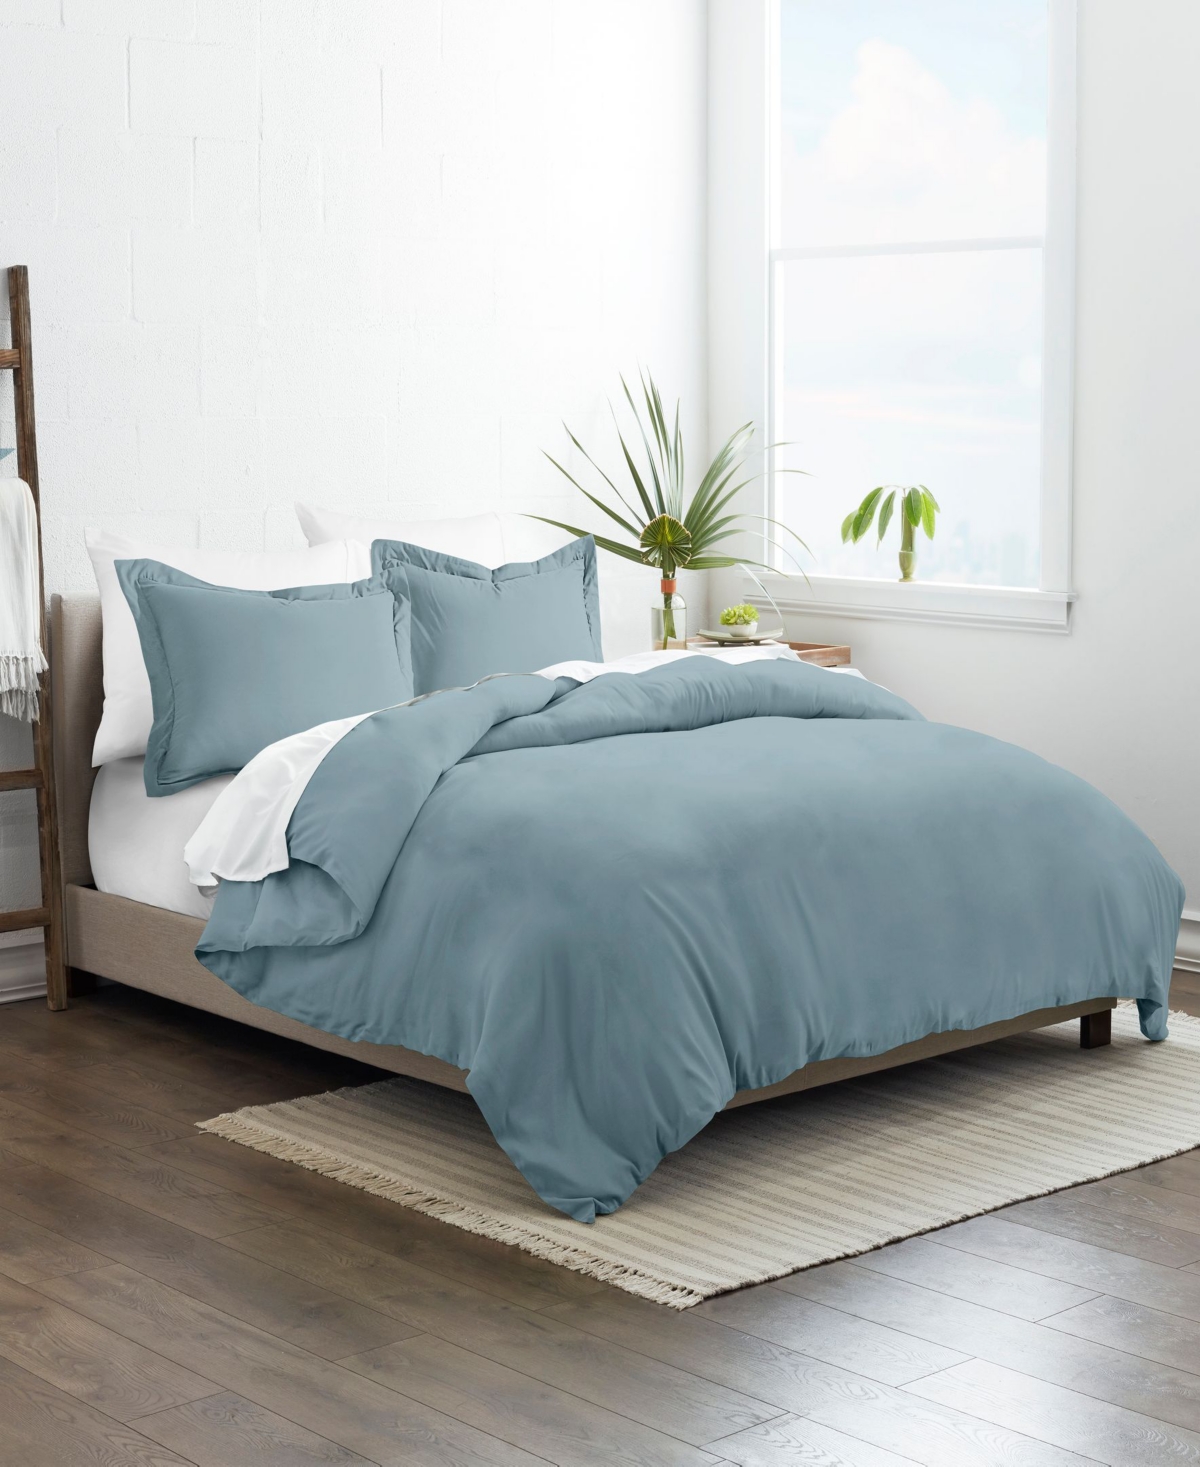 Ienjoy Home Dynamically Dashing Duvet Cover Set By The Home Collection, Twin/twin Xl In Ocean